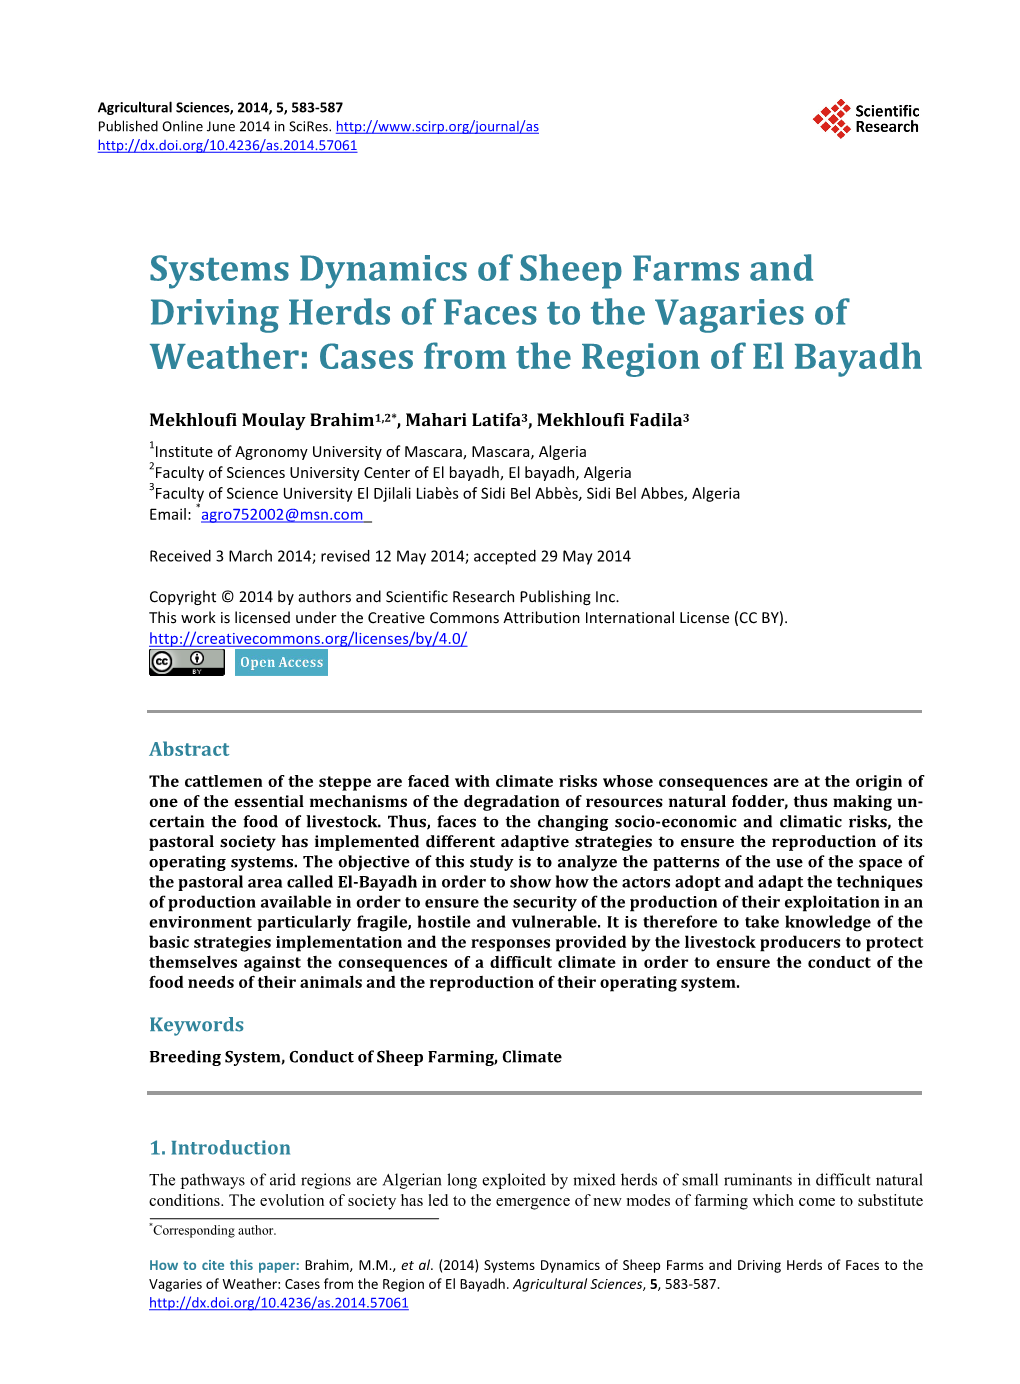 Systems Dynamics of Sheep Farms and Driving Herds of Faces to the Vagaries of Weather: Cases from the Region of El Bayadh